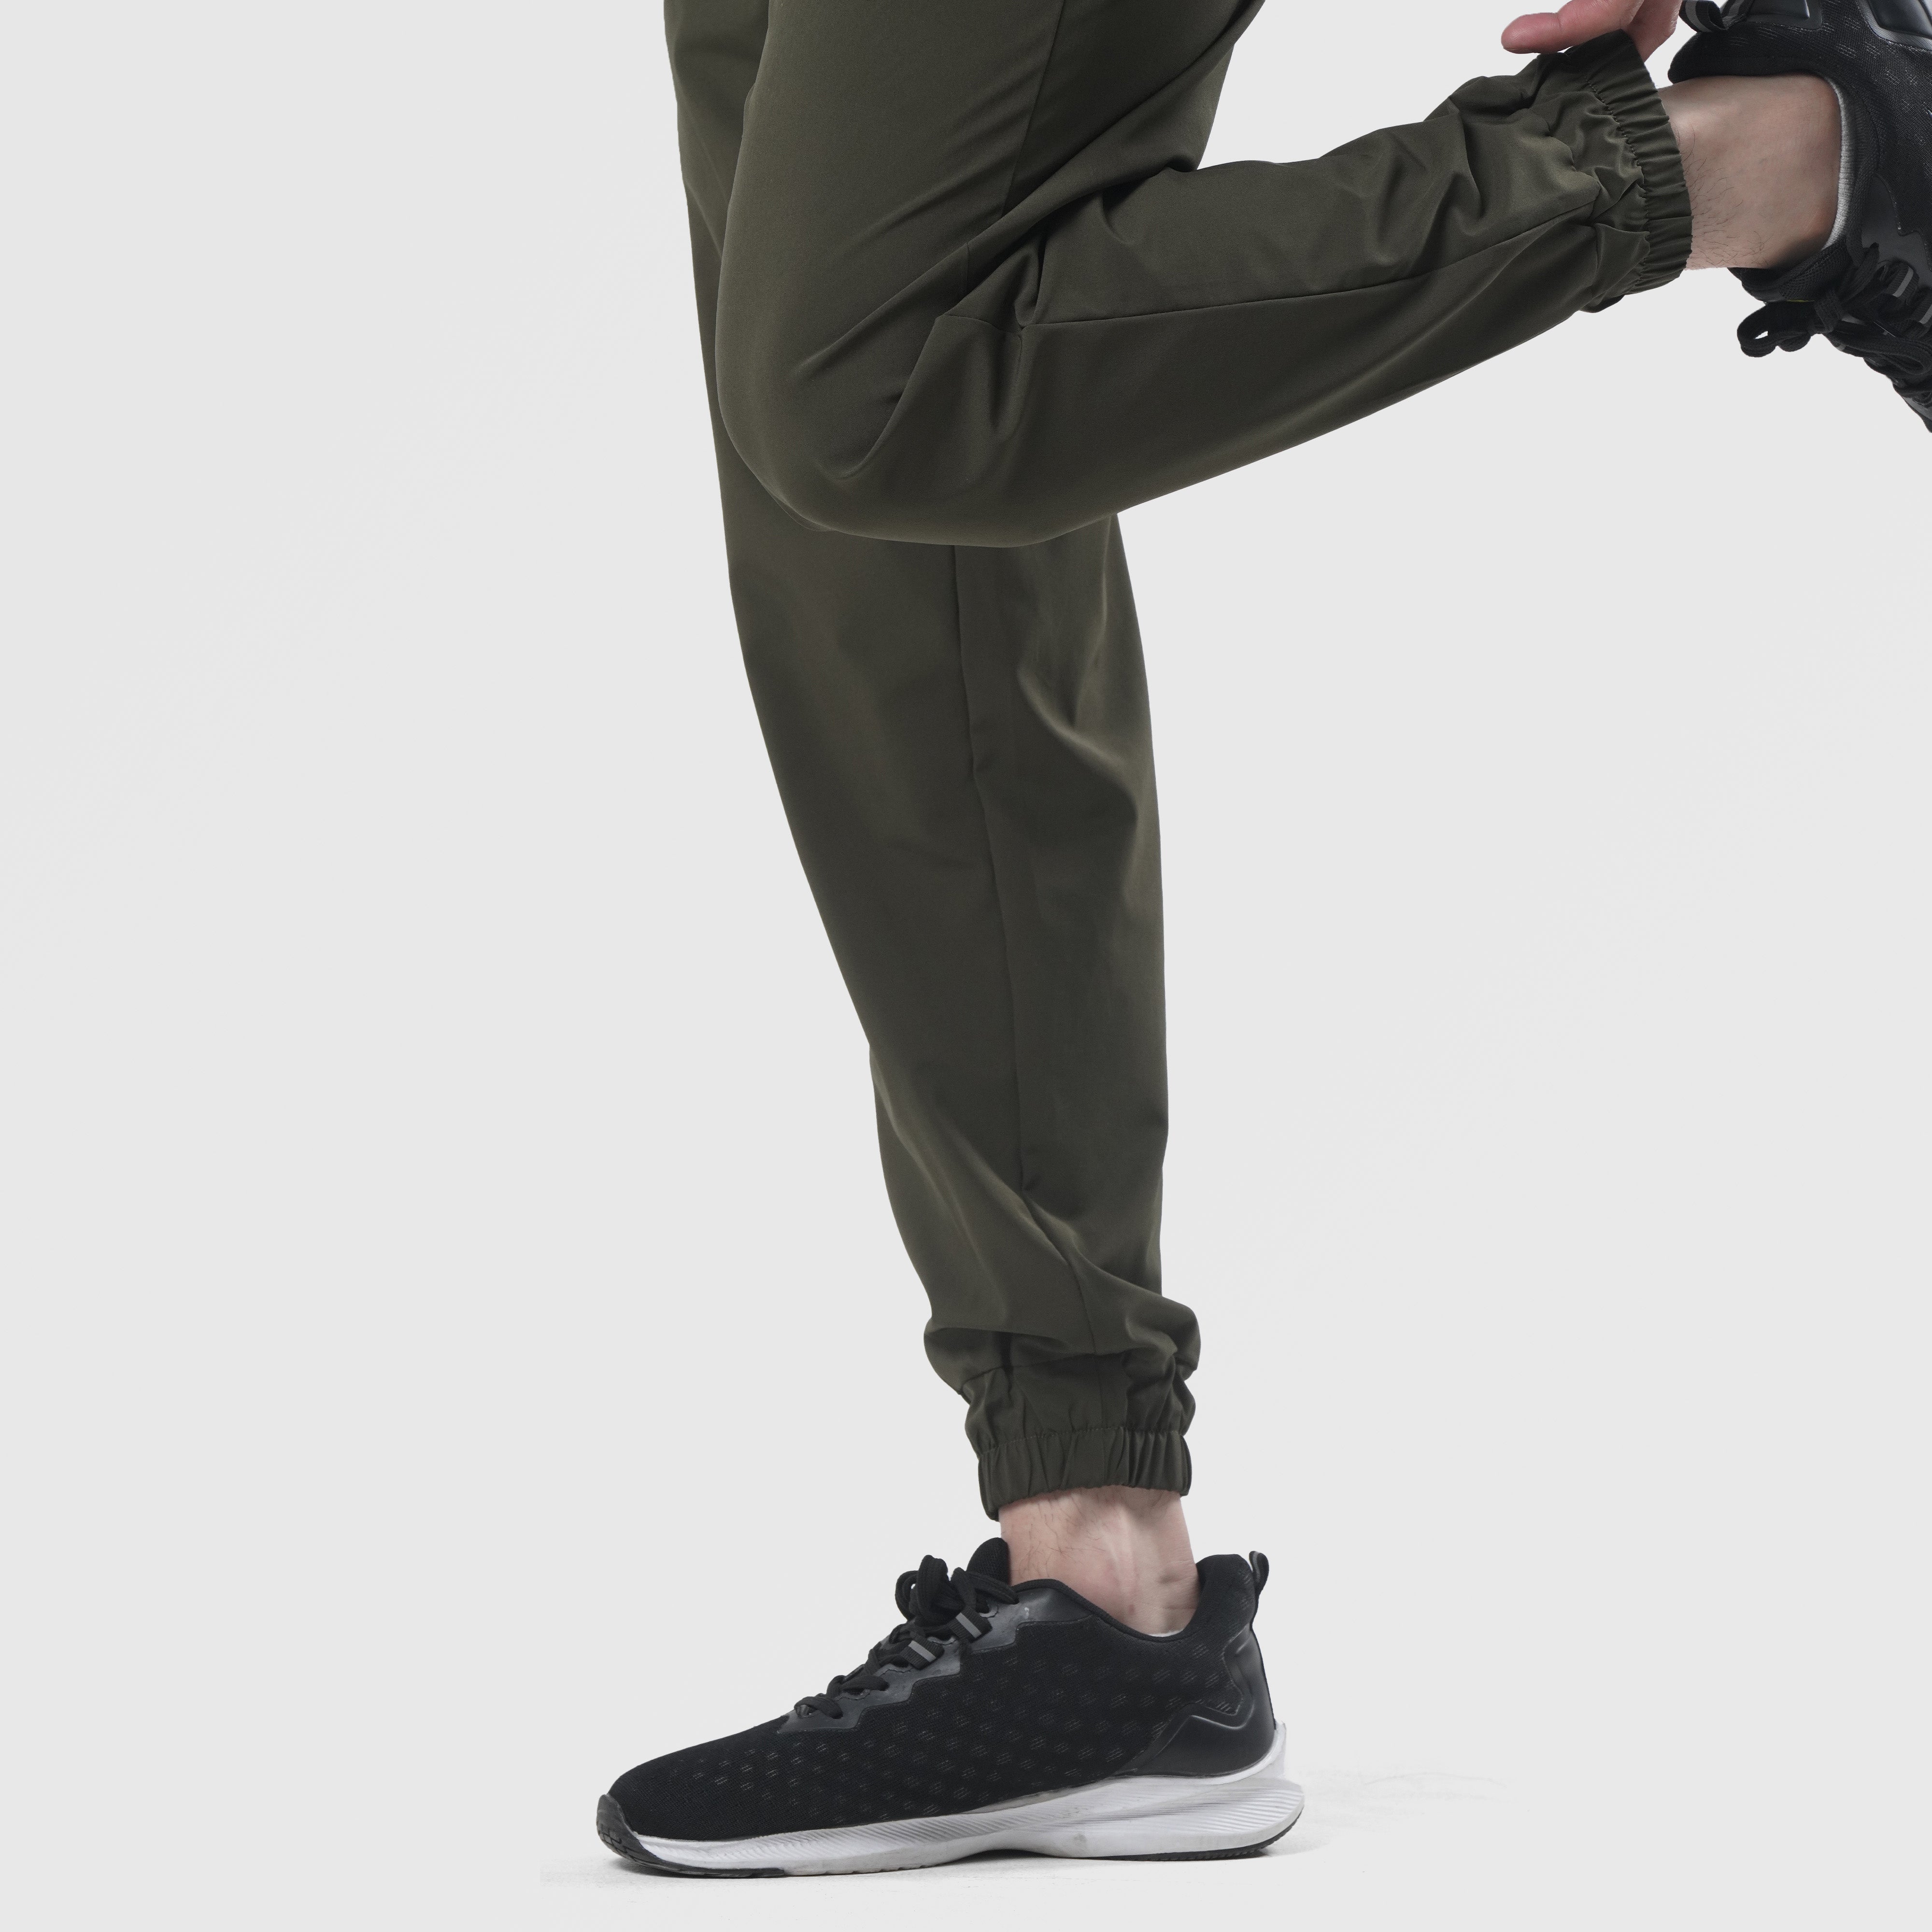 Angus Joggers (Olive)